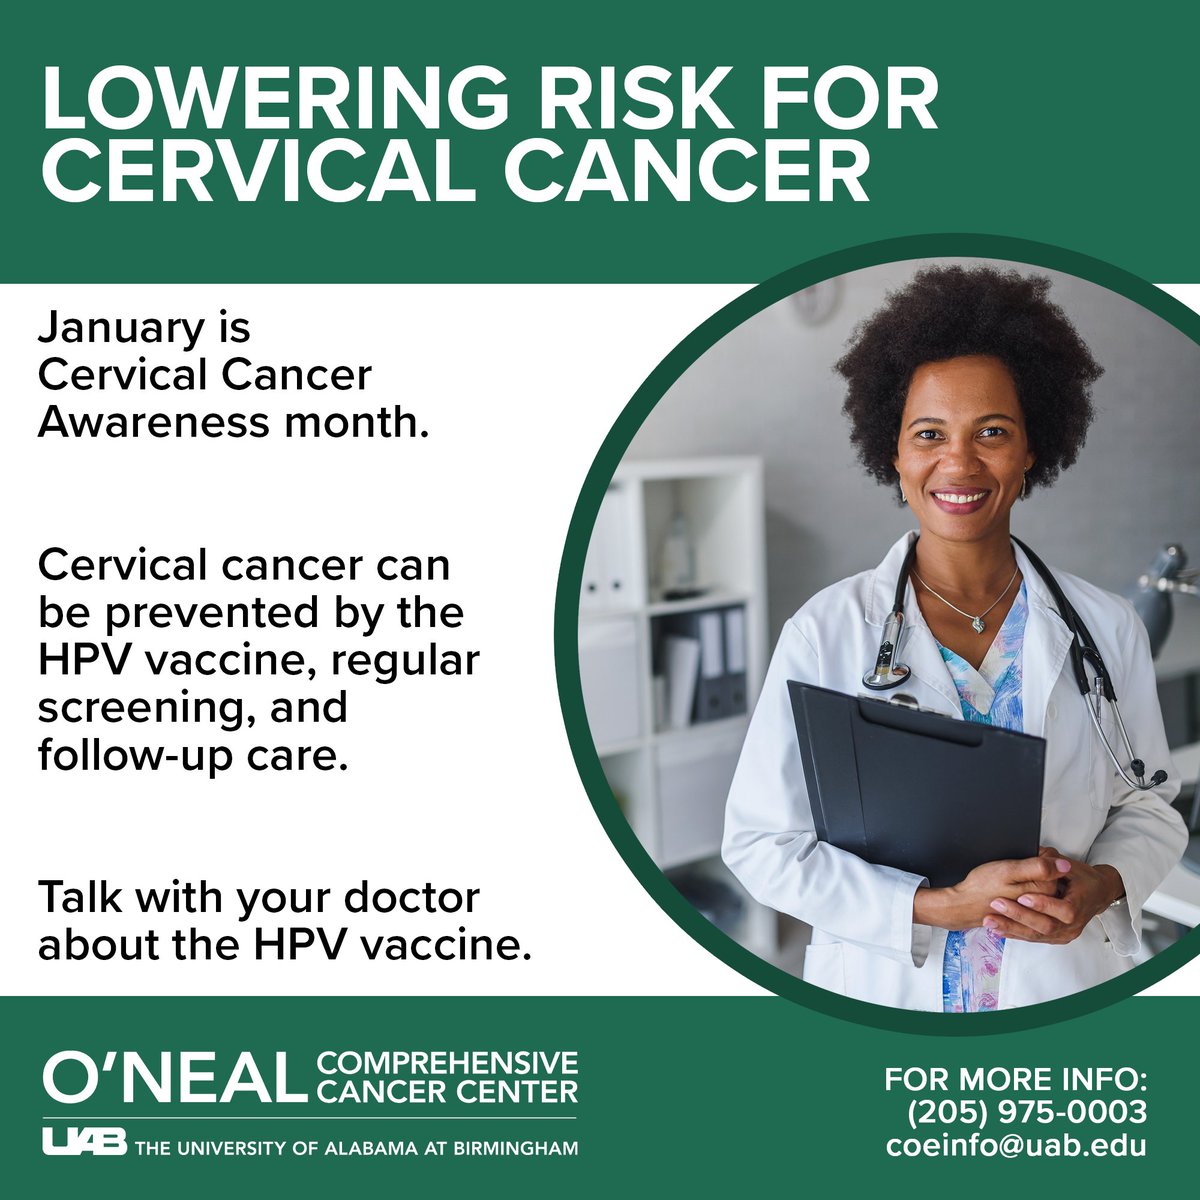 Talk with your doctor about the HPV vaccine, which provides safe and effective protection against six cancers, including cervical cancer. For more information, call the Office of Community Outreach & Engagement at (205) 975-0003, or email coeinfo@uab.edu.